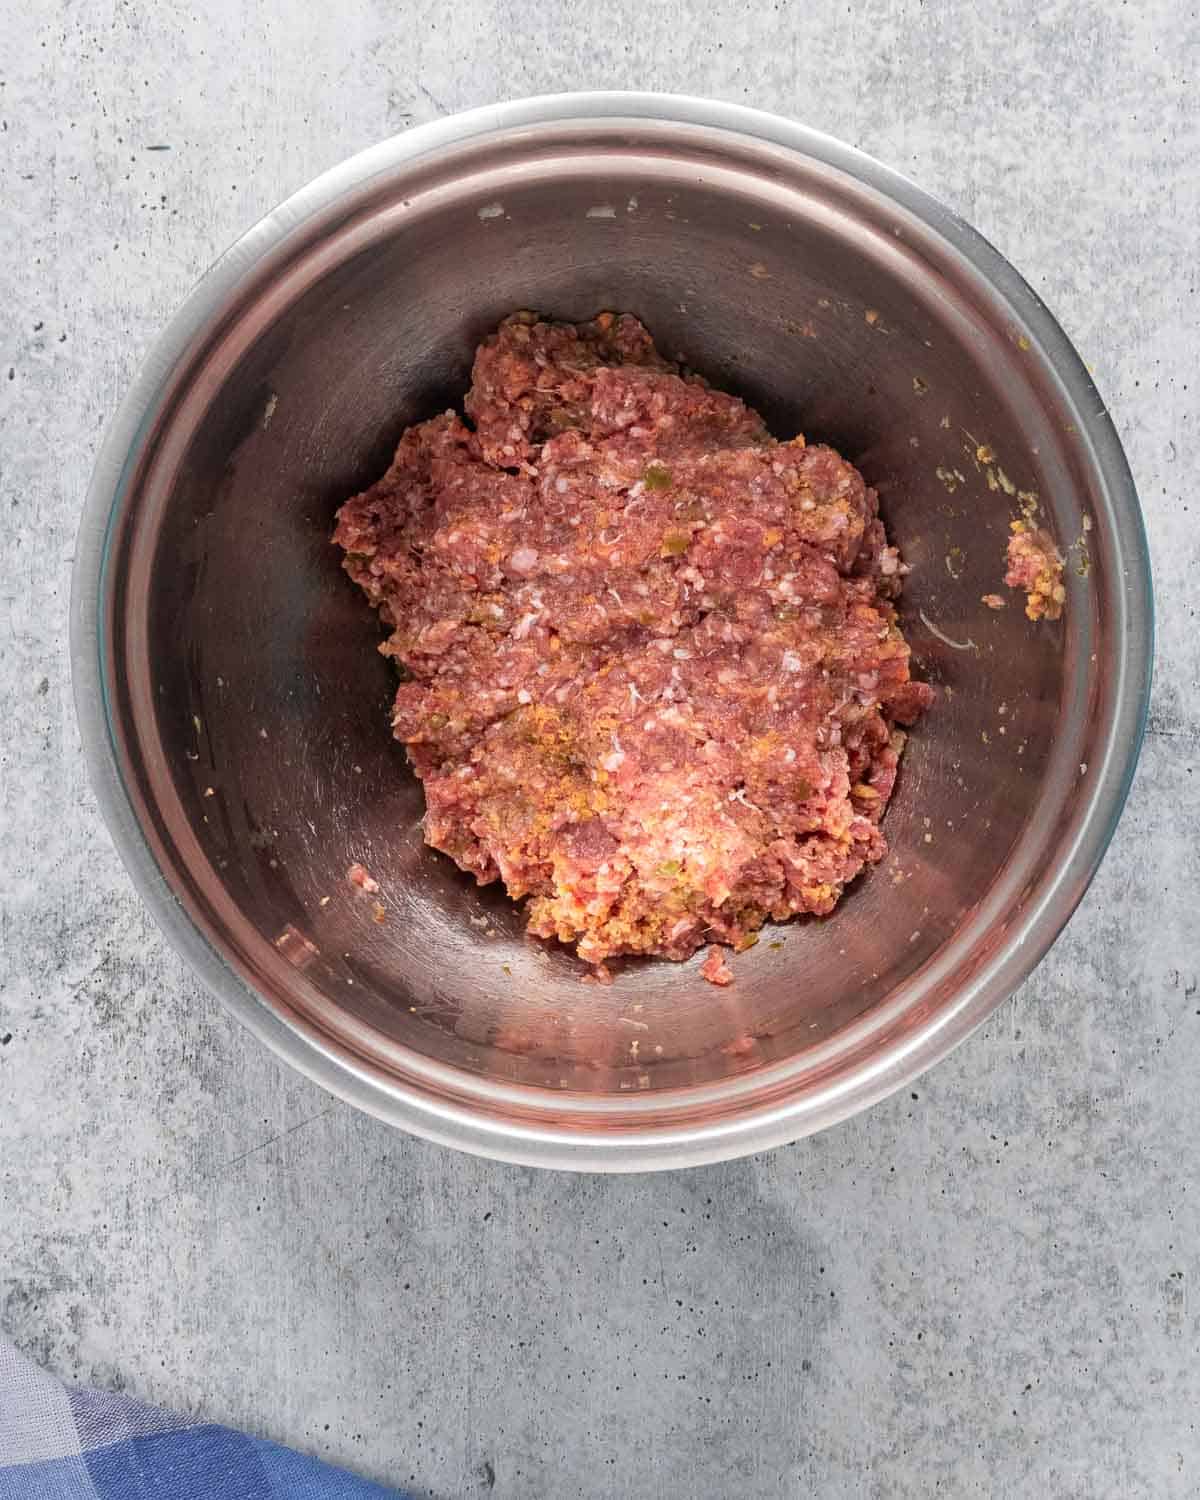 Mixed meatball mixture in a stainless steel mixing bowl.